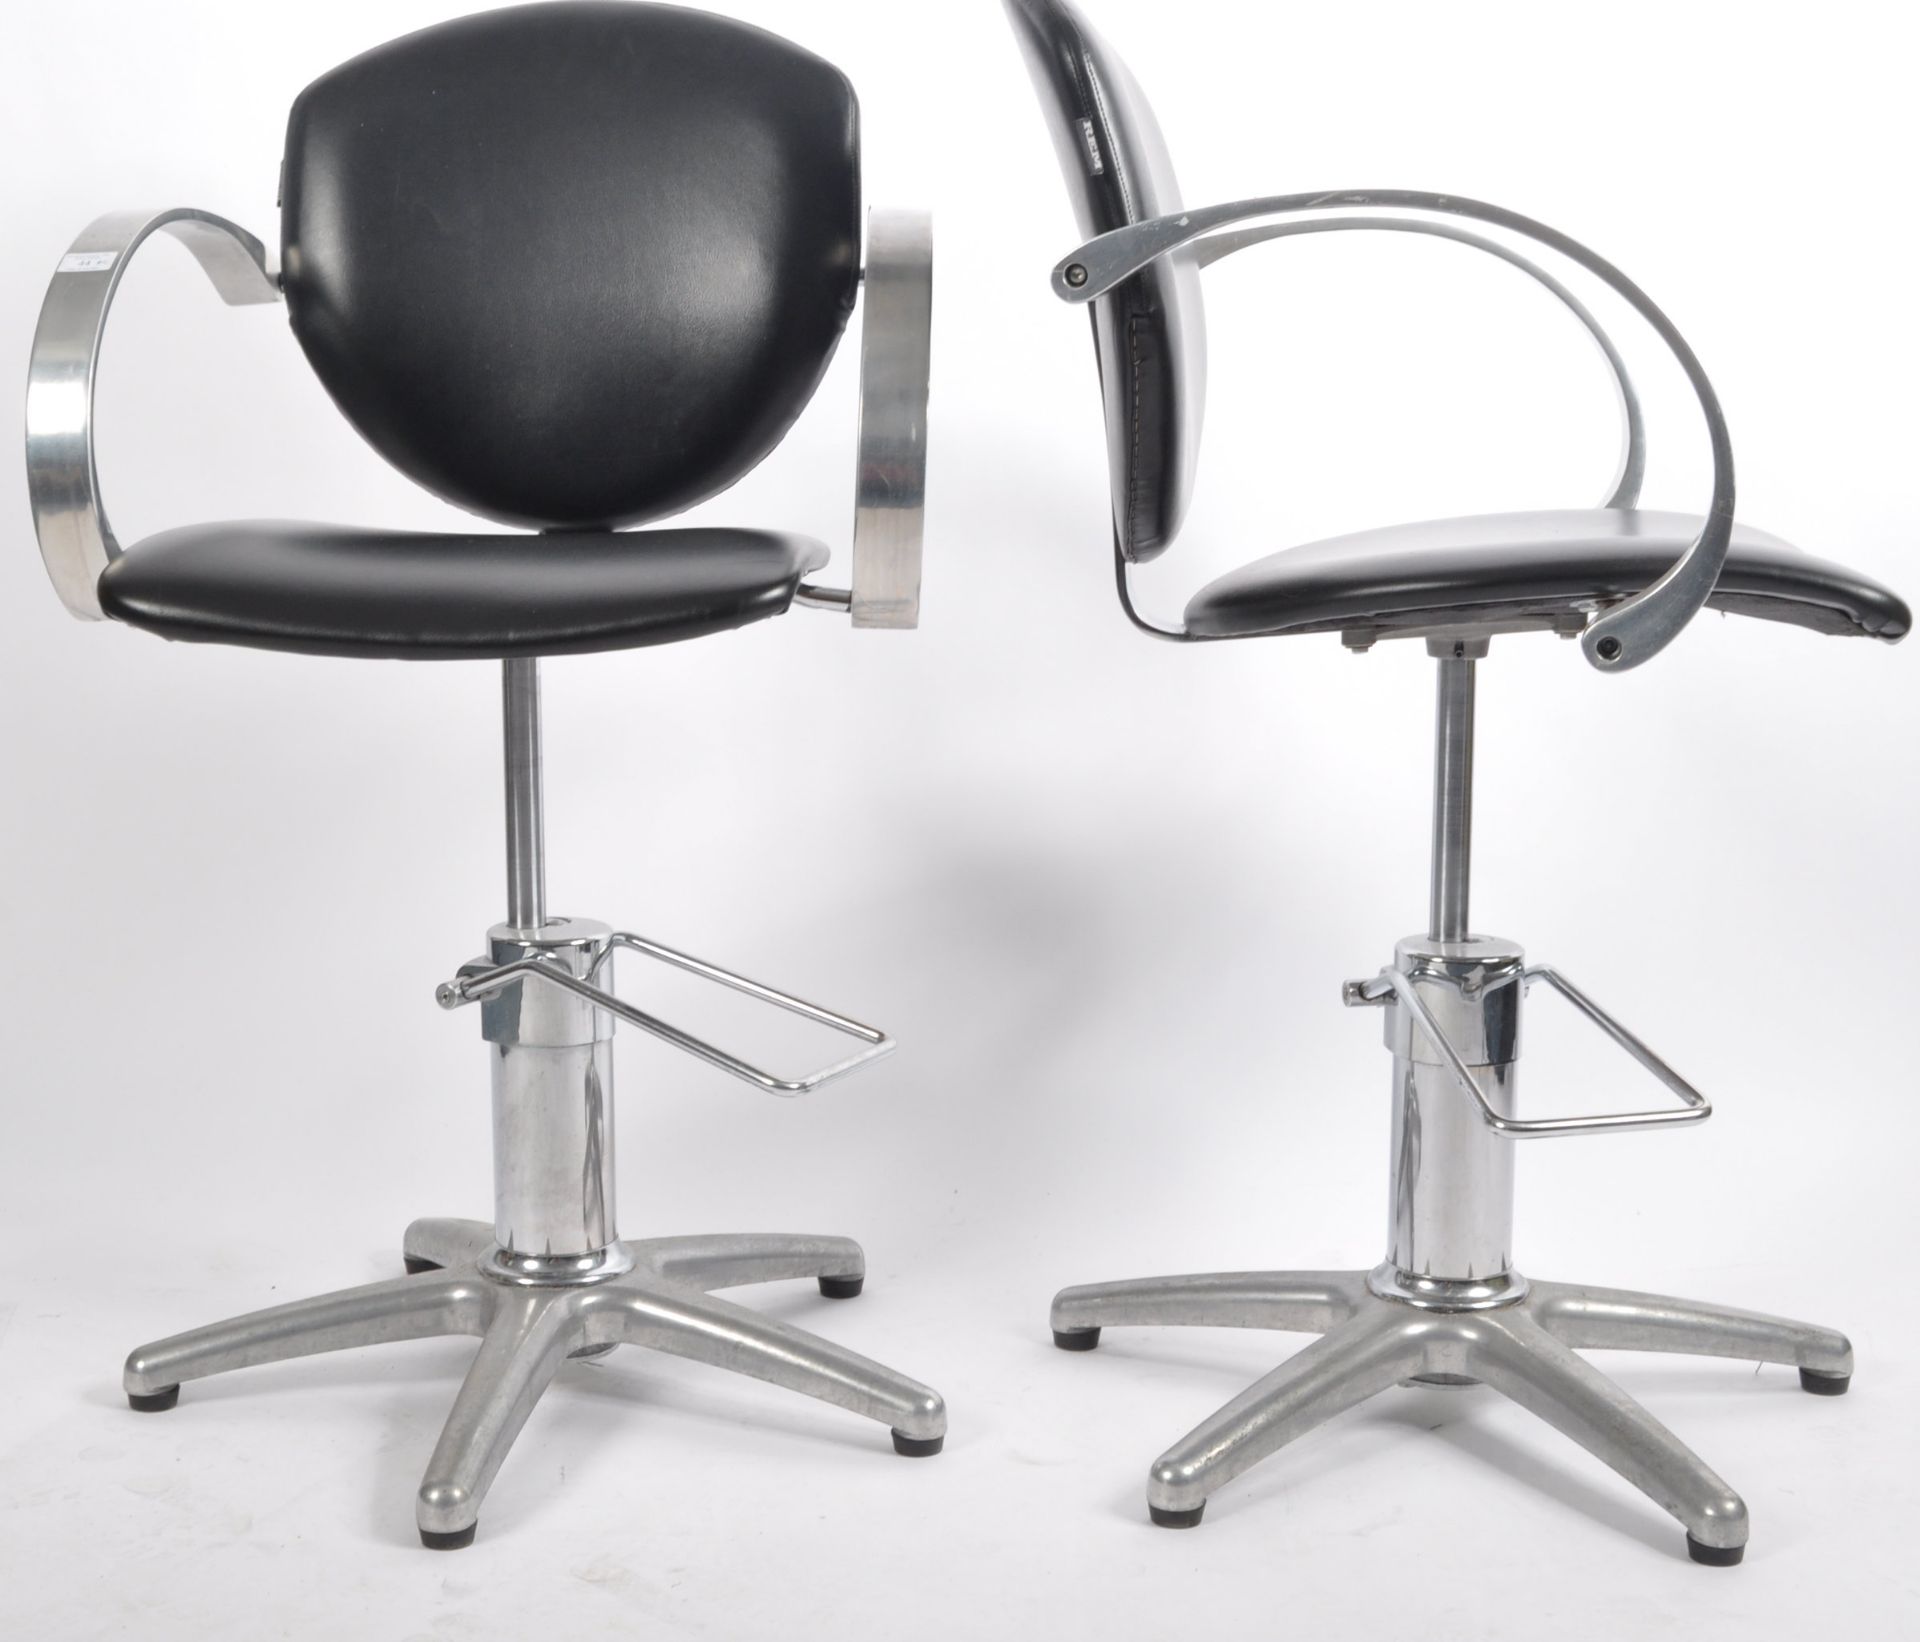 REM - MATCHING PAIR OF ADJUSTABLE BARBER'S ARMCHAIRS - Image 7 of 10